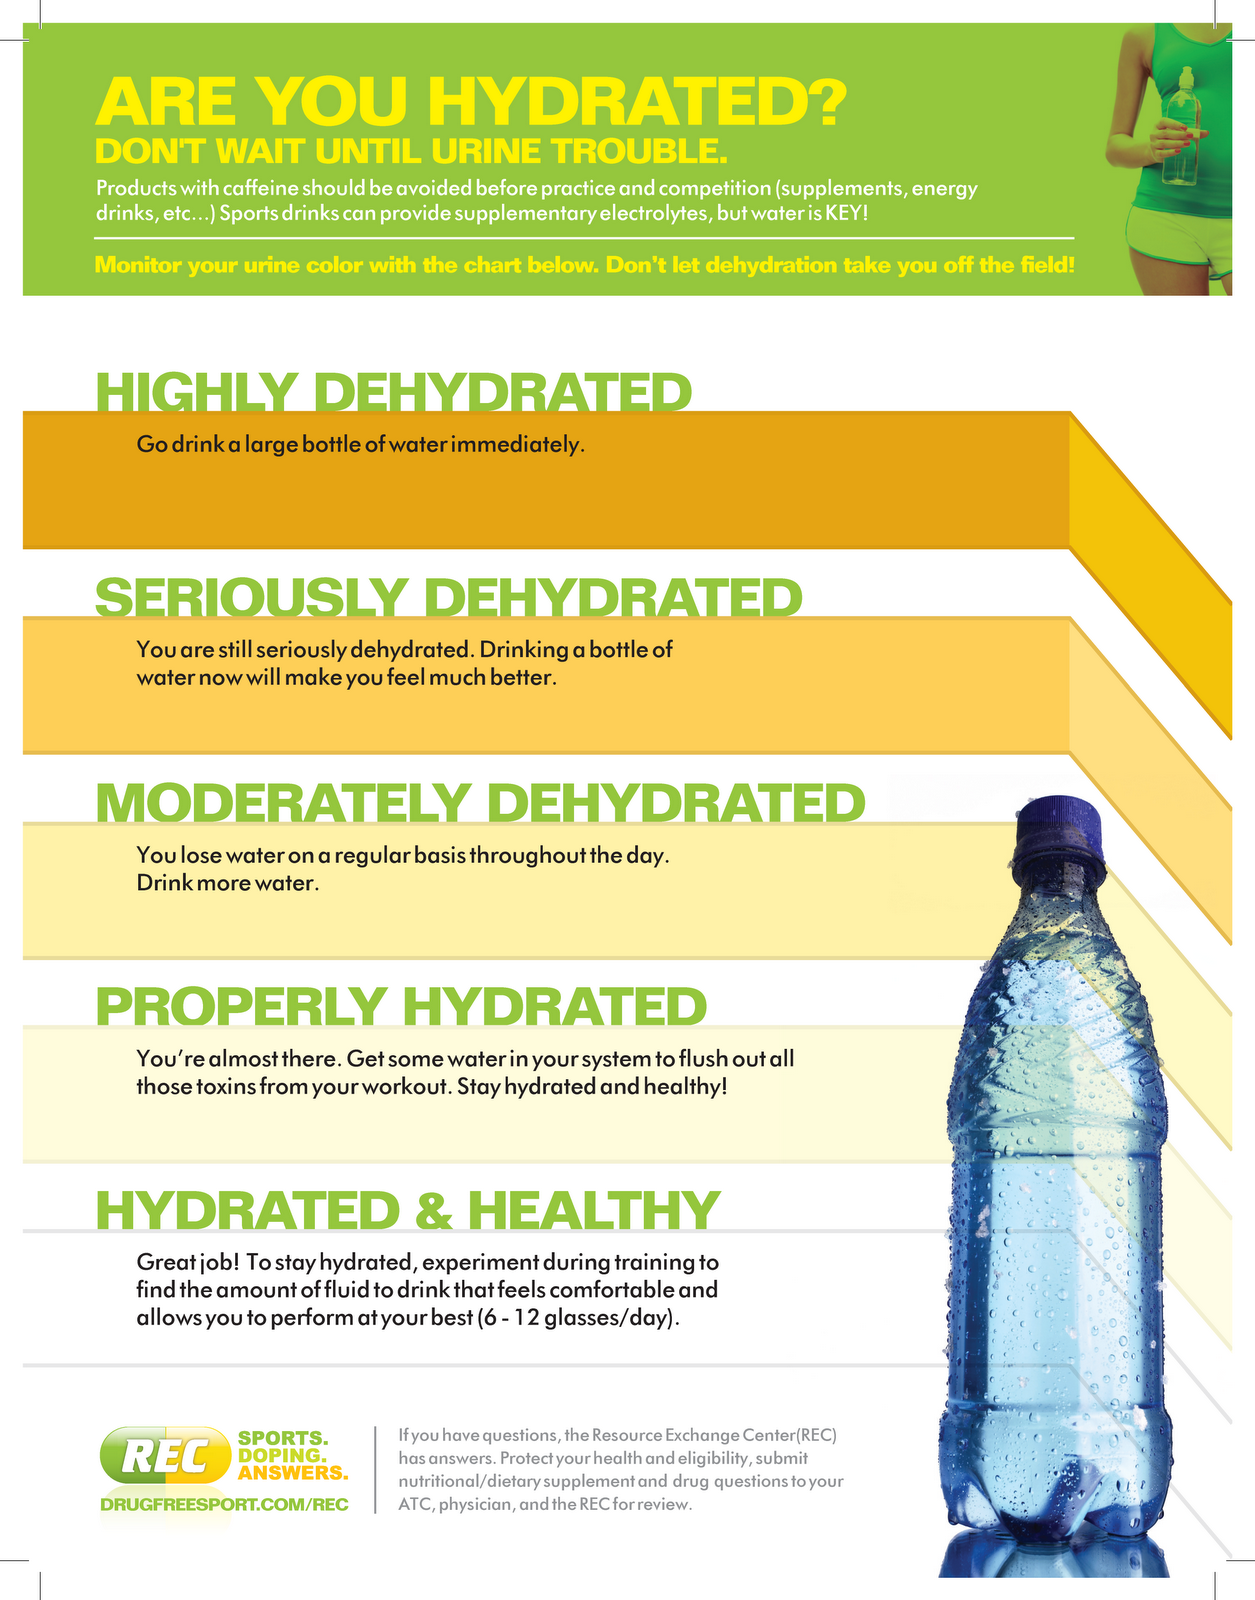 How Hydrated are You? | Advocates for Injured Athletes